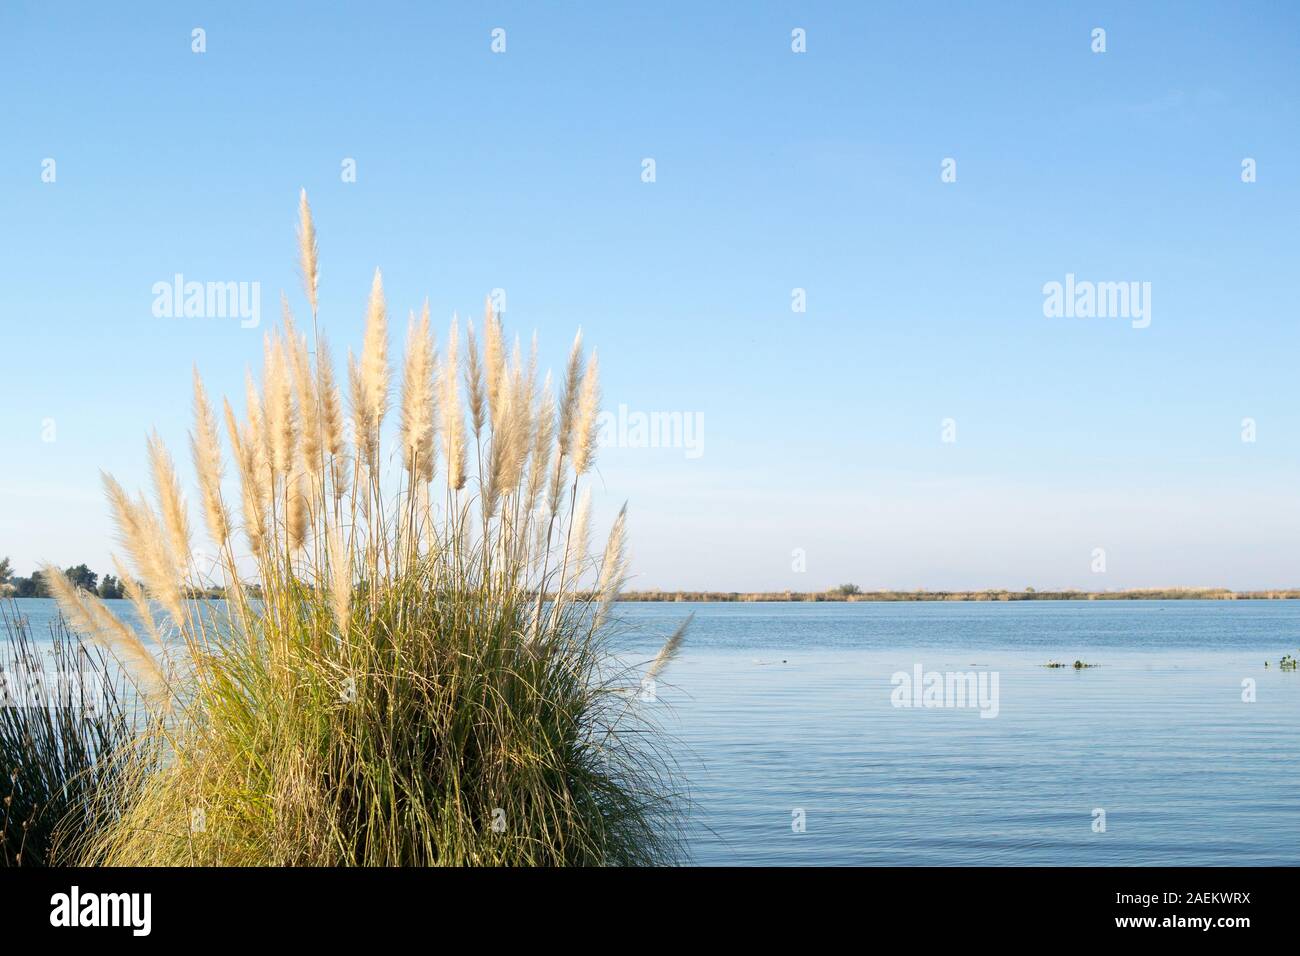 Bulrushes on the edge of the San Joaquin River as seen from the Dow wetlands - the environmental buffer zone next to the Dow Chemical plant. Stock Photo